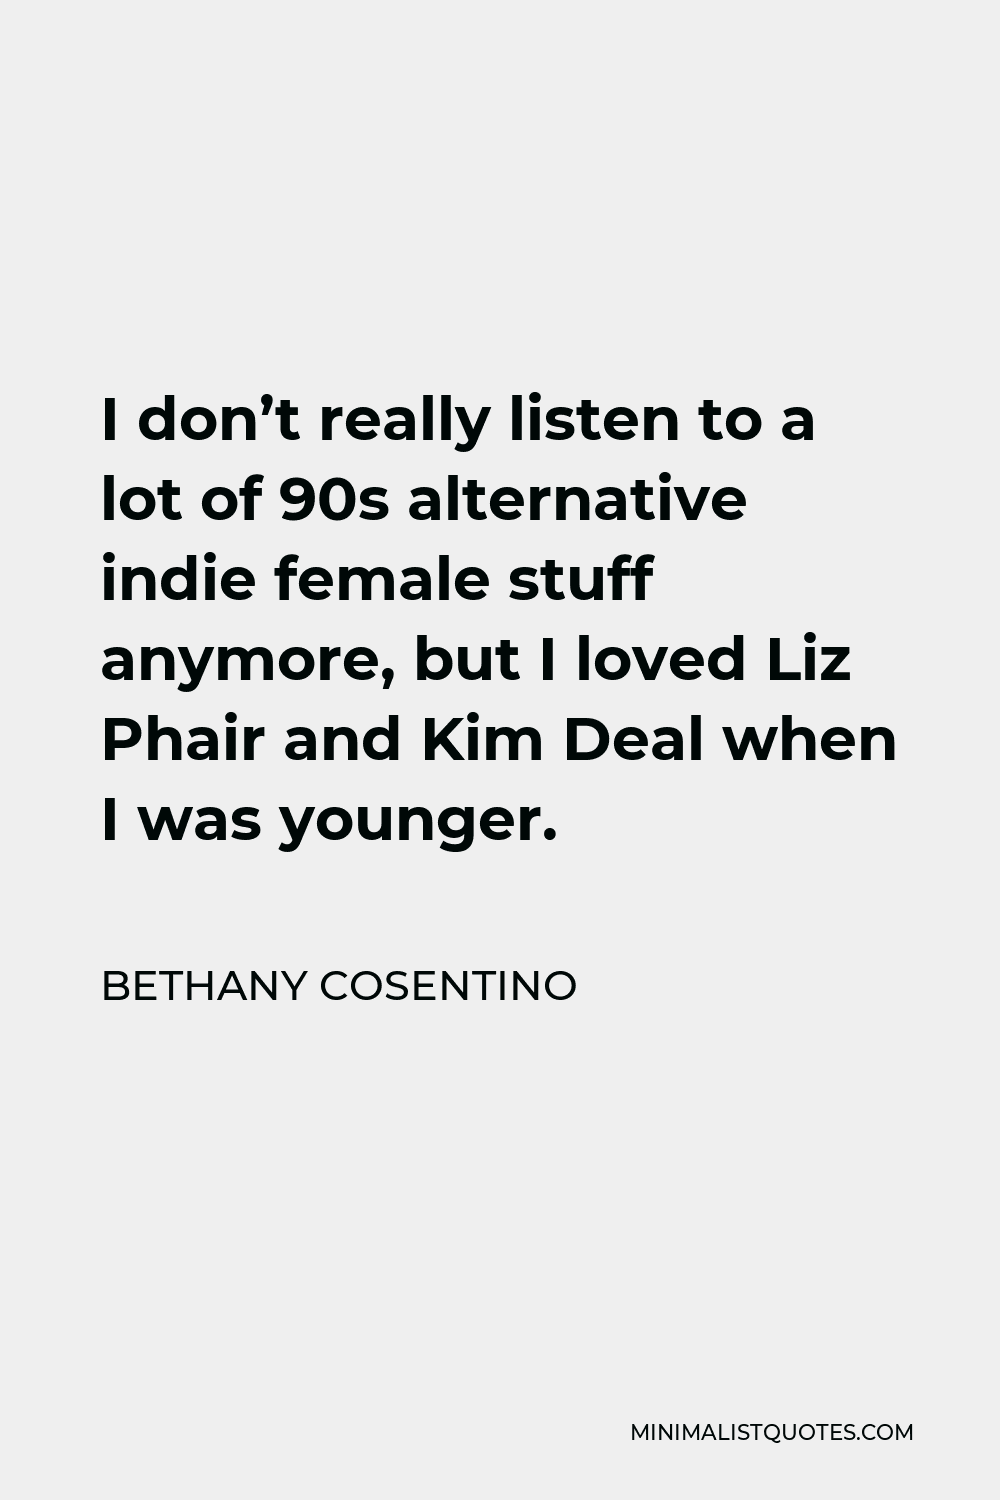 Bethany Cosentino Quote - I don’t really listen to a lot of 90s alternative indie female stuff anymore, but I loved Liz Phair and Kim Deal when I was younger.